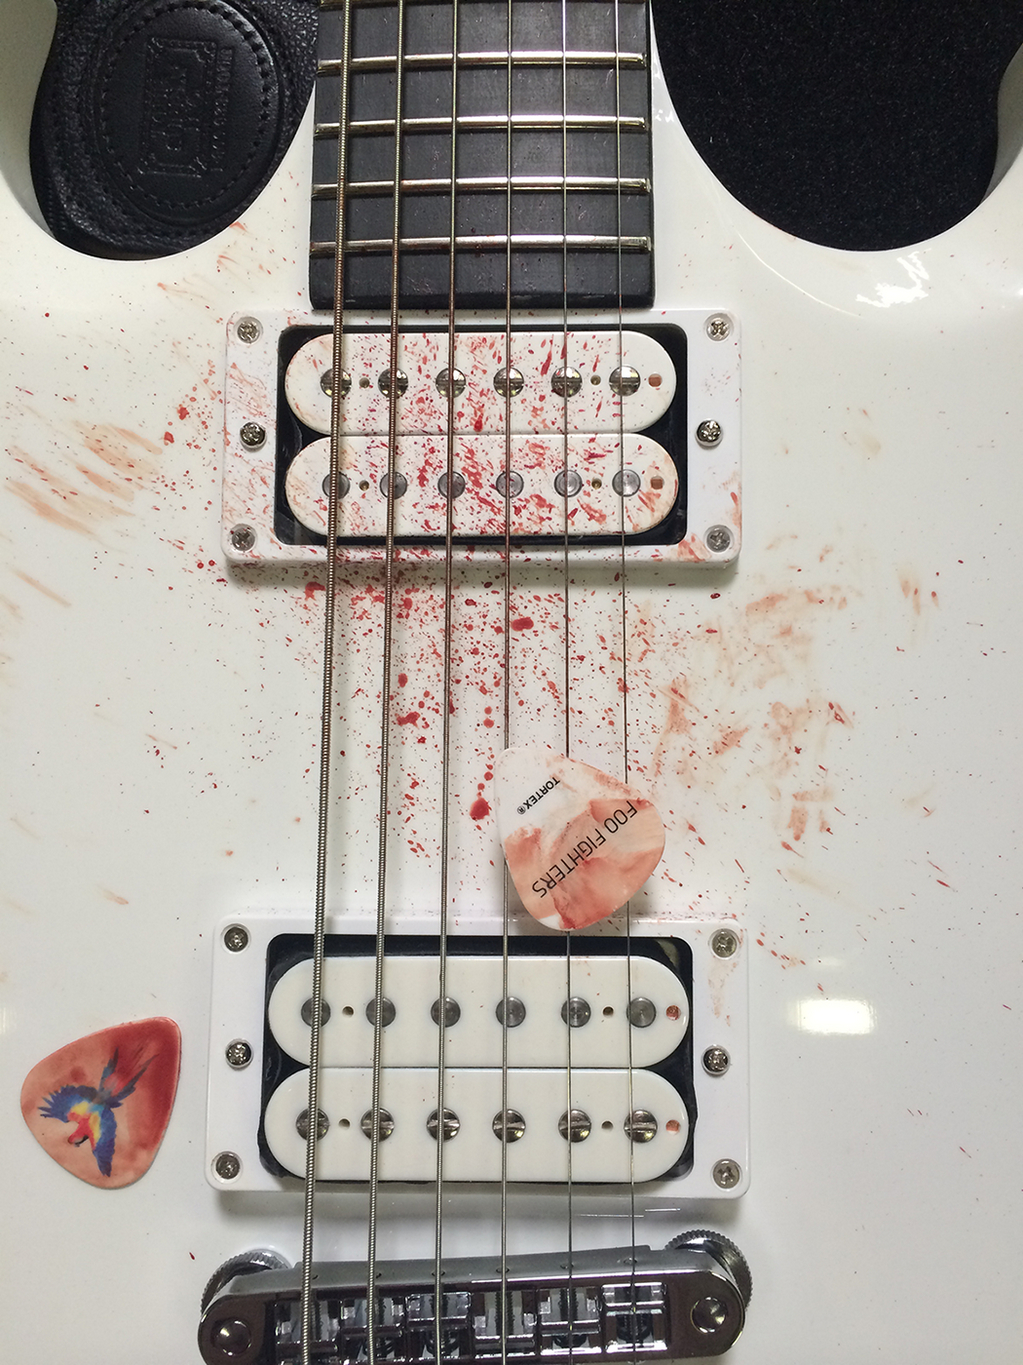 Dave Grohls guitar after practice